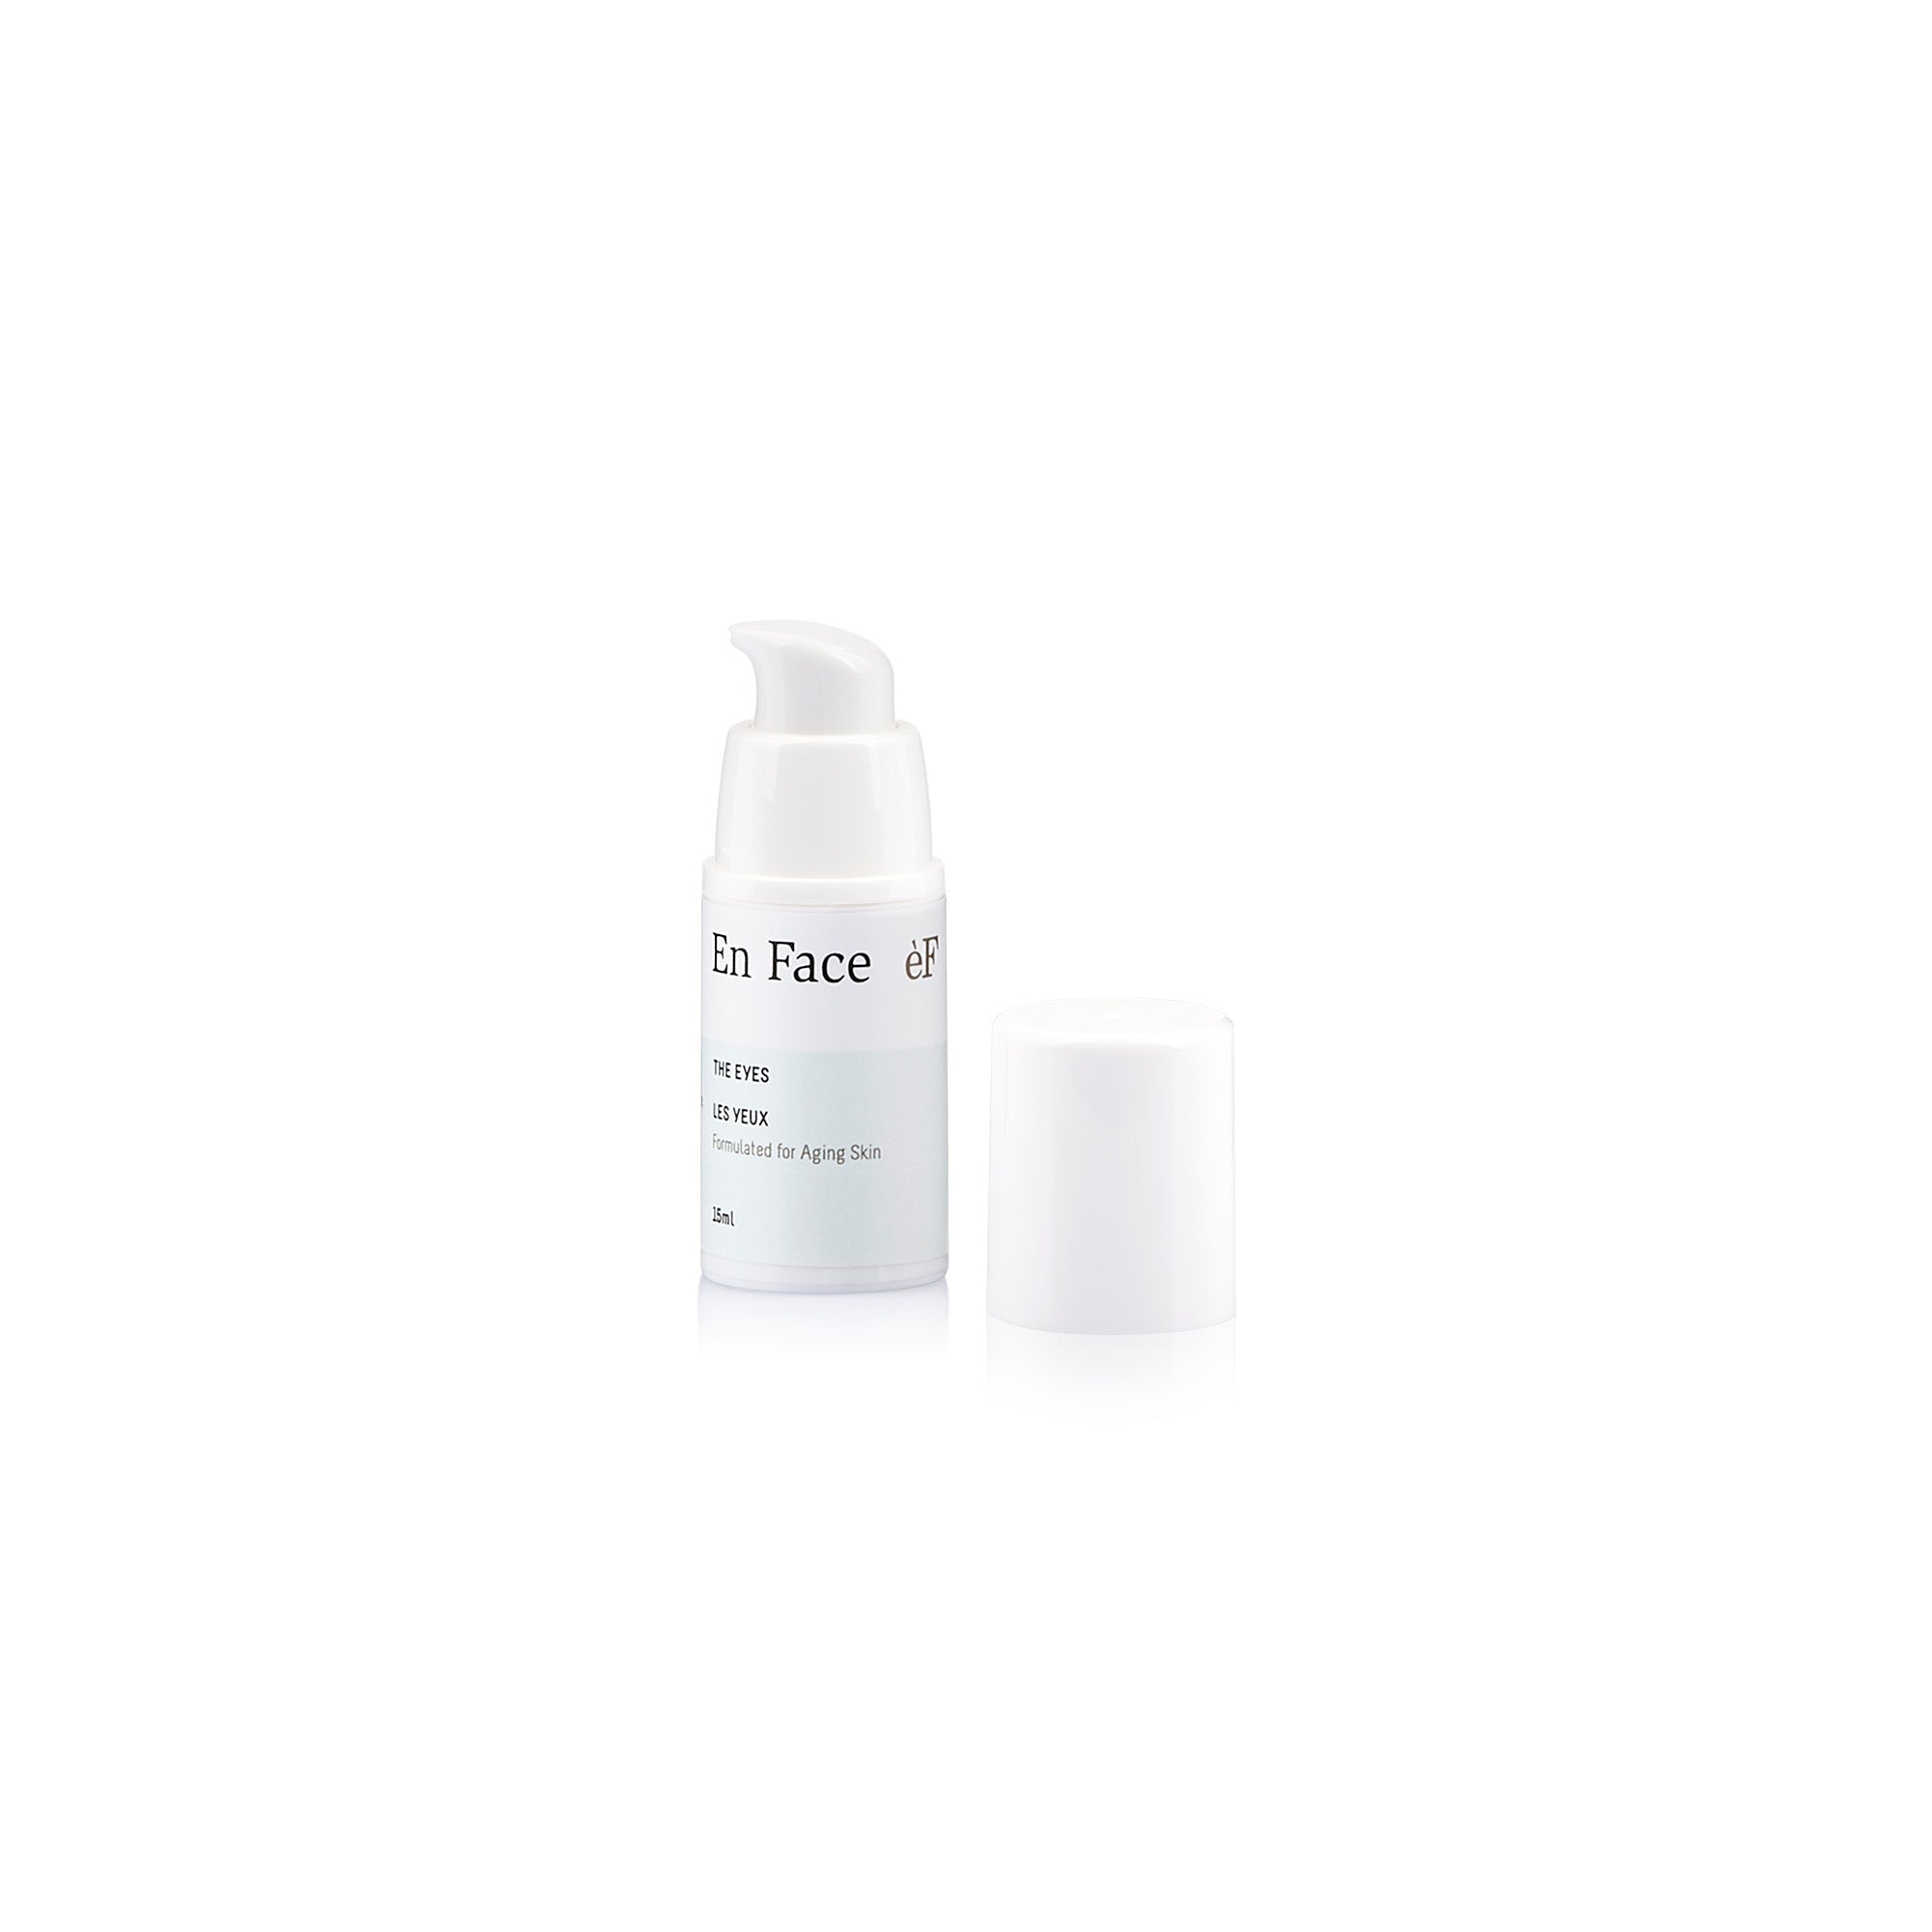 The Eyes Multi-Peptide Firming 15ml